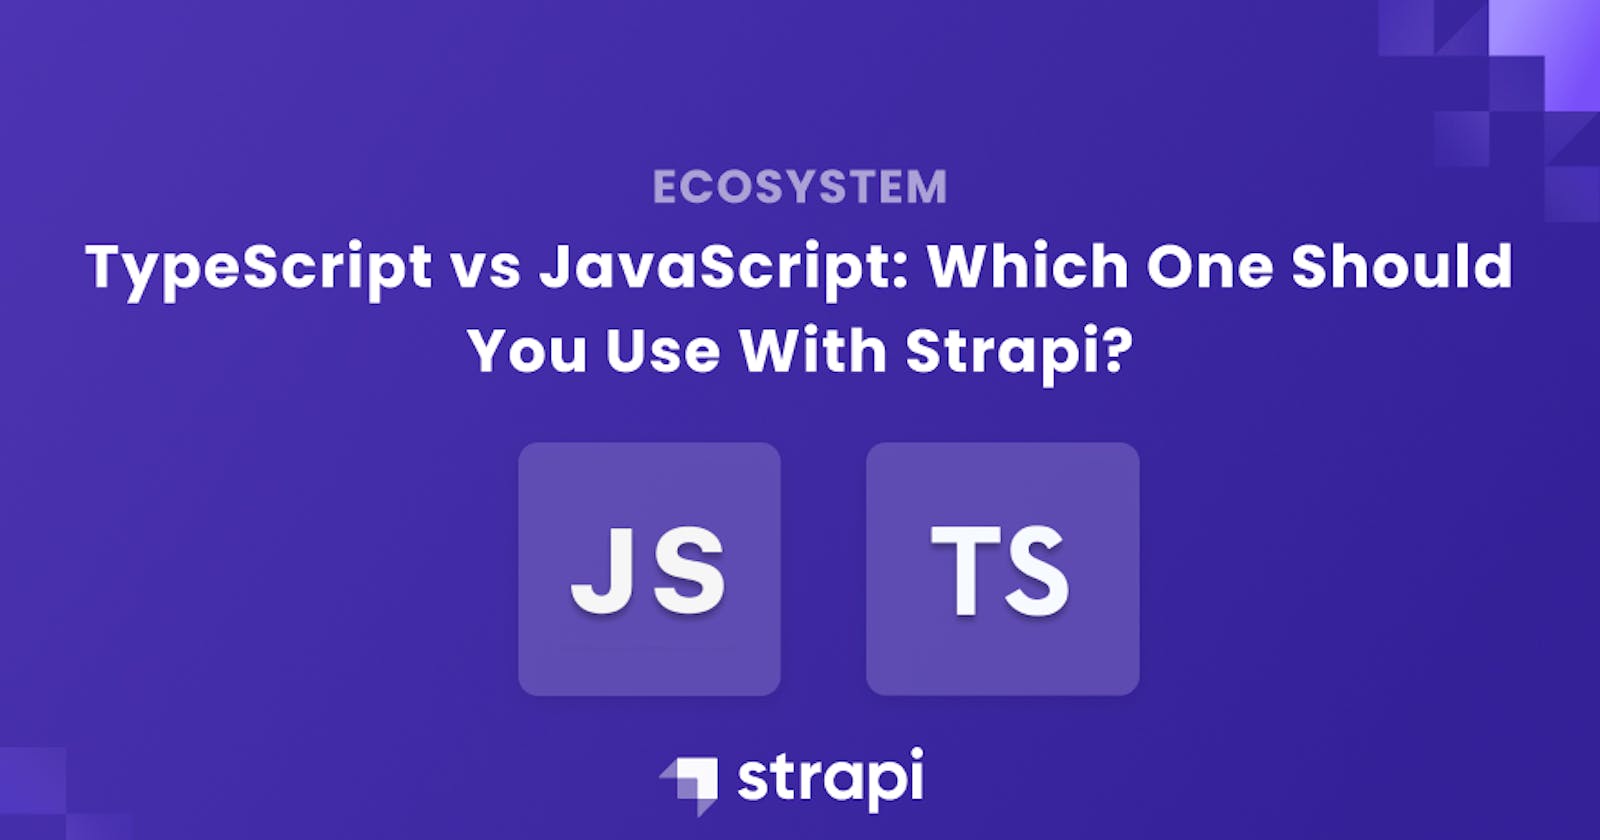 TypeScript vs JavaScript: Which One Should You Use With Strapi?